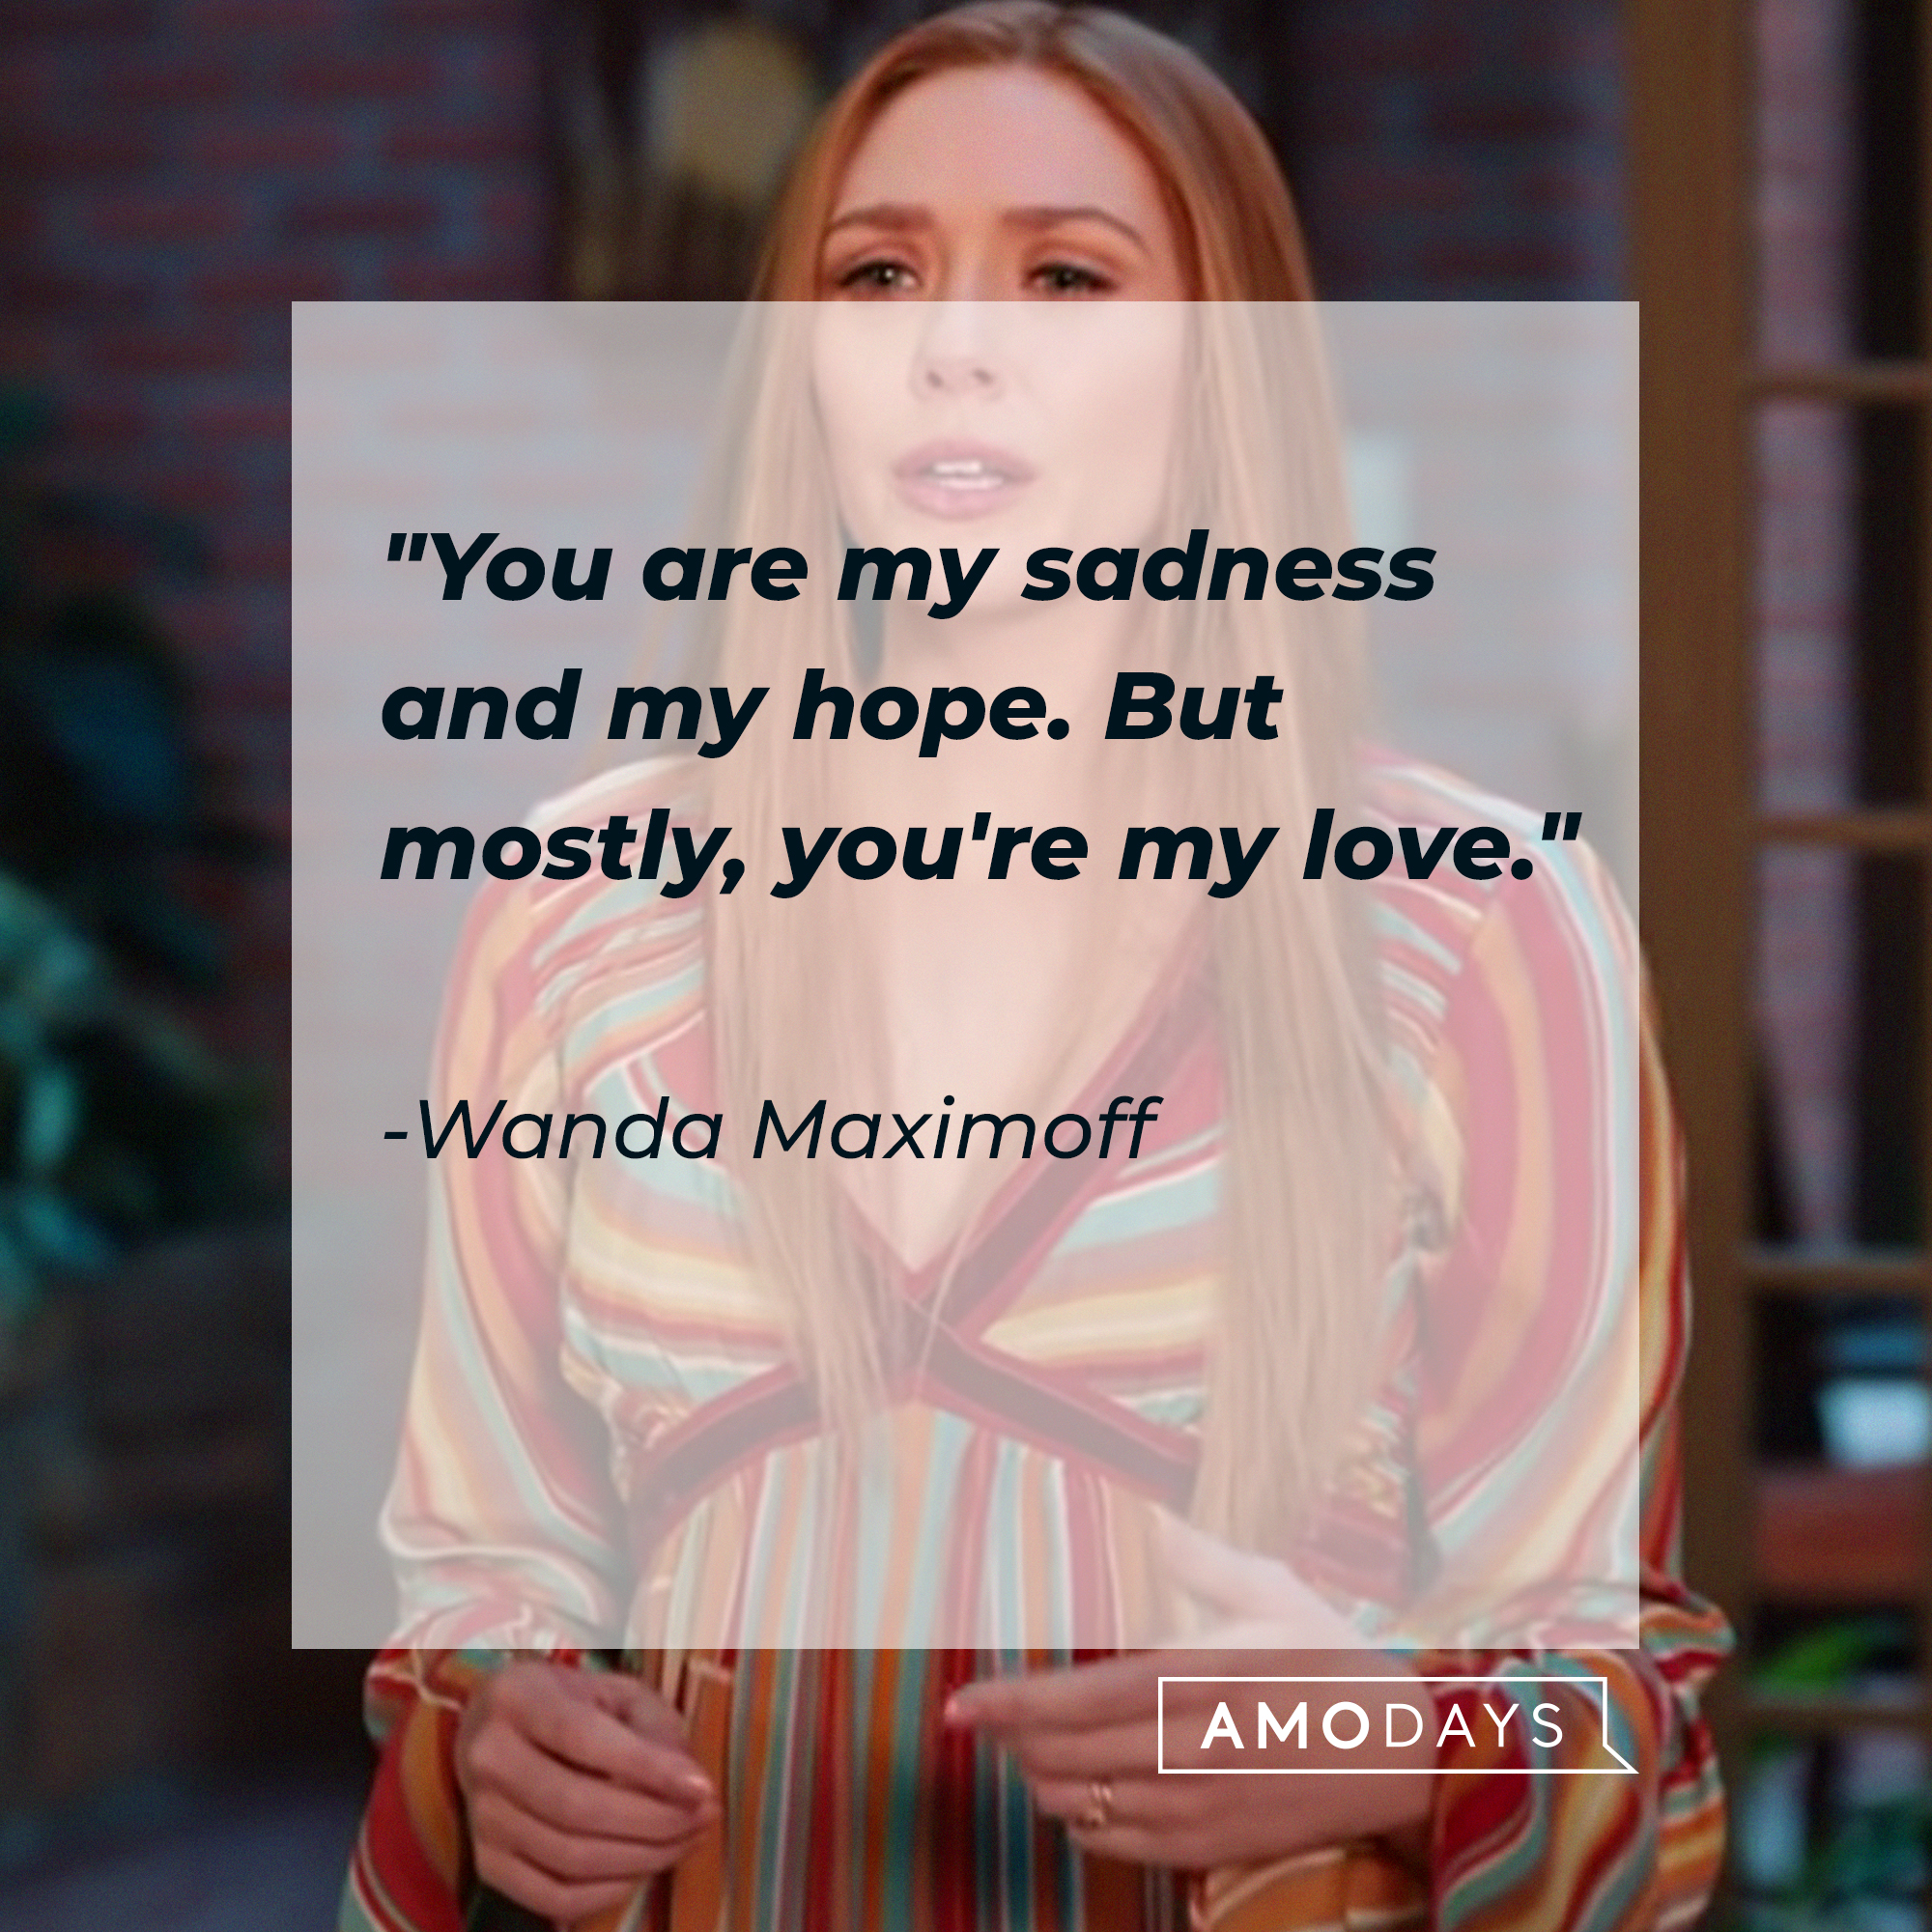 Wanda Maximoff's quote: "You are my sadness and my hope. But mostly, you're my love" | Source: Facebook/wandavisionofficial